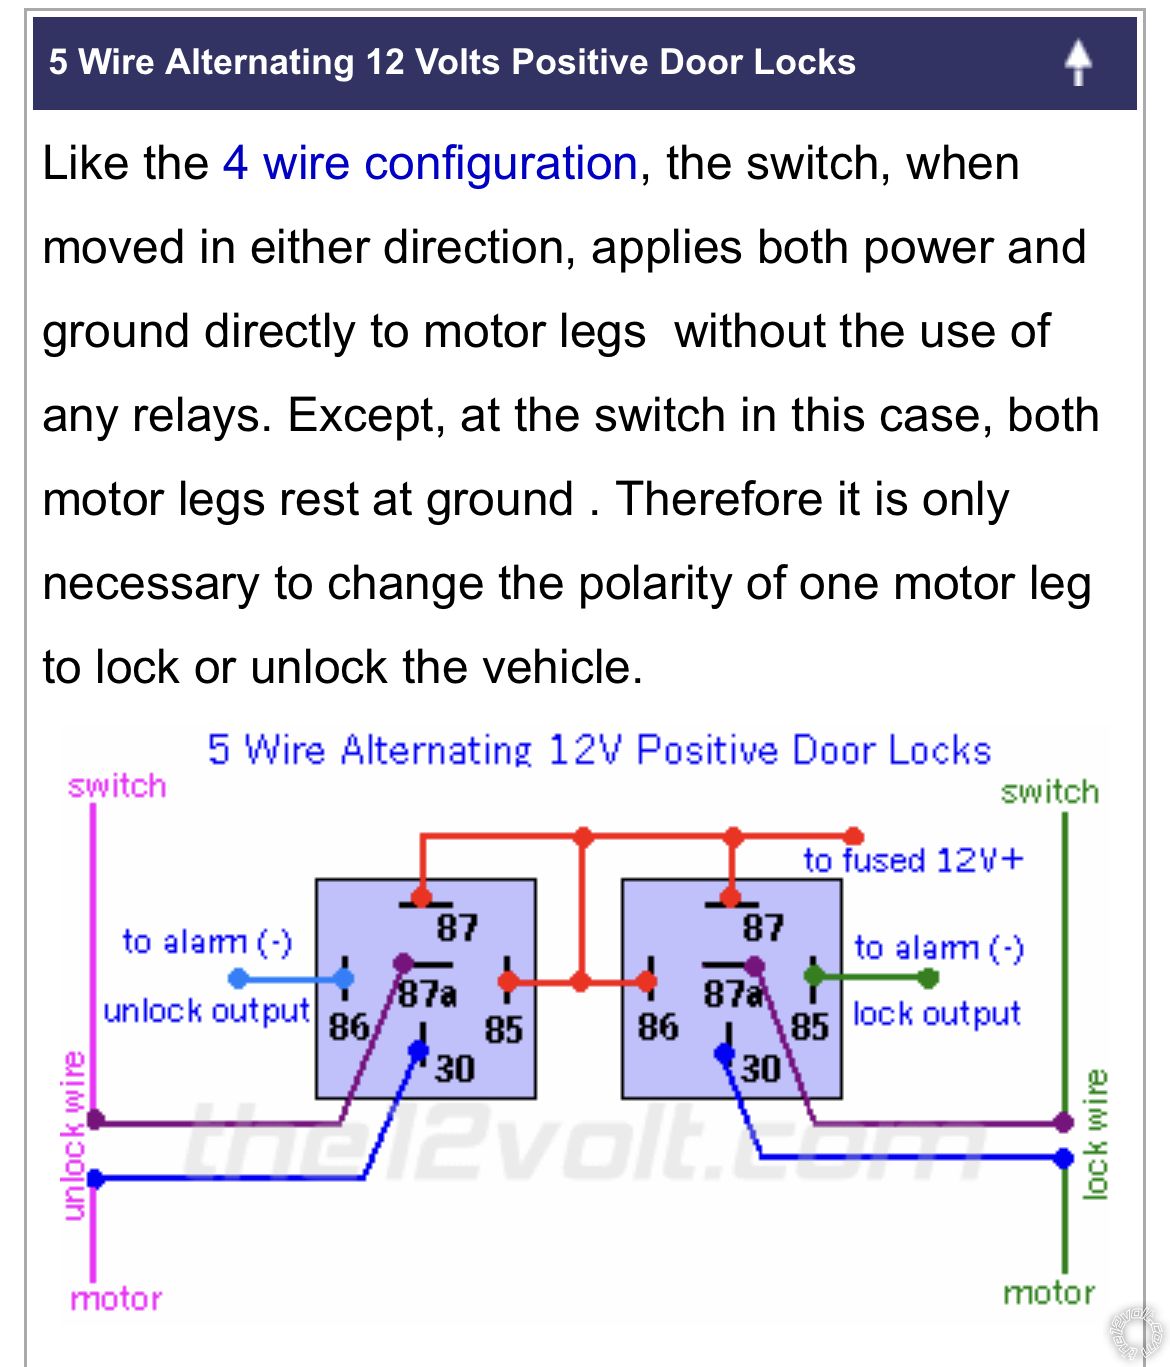 Where On Door Lock Switch Does The 87a Switch Wire Connect? - Last Post -- posted image.